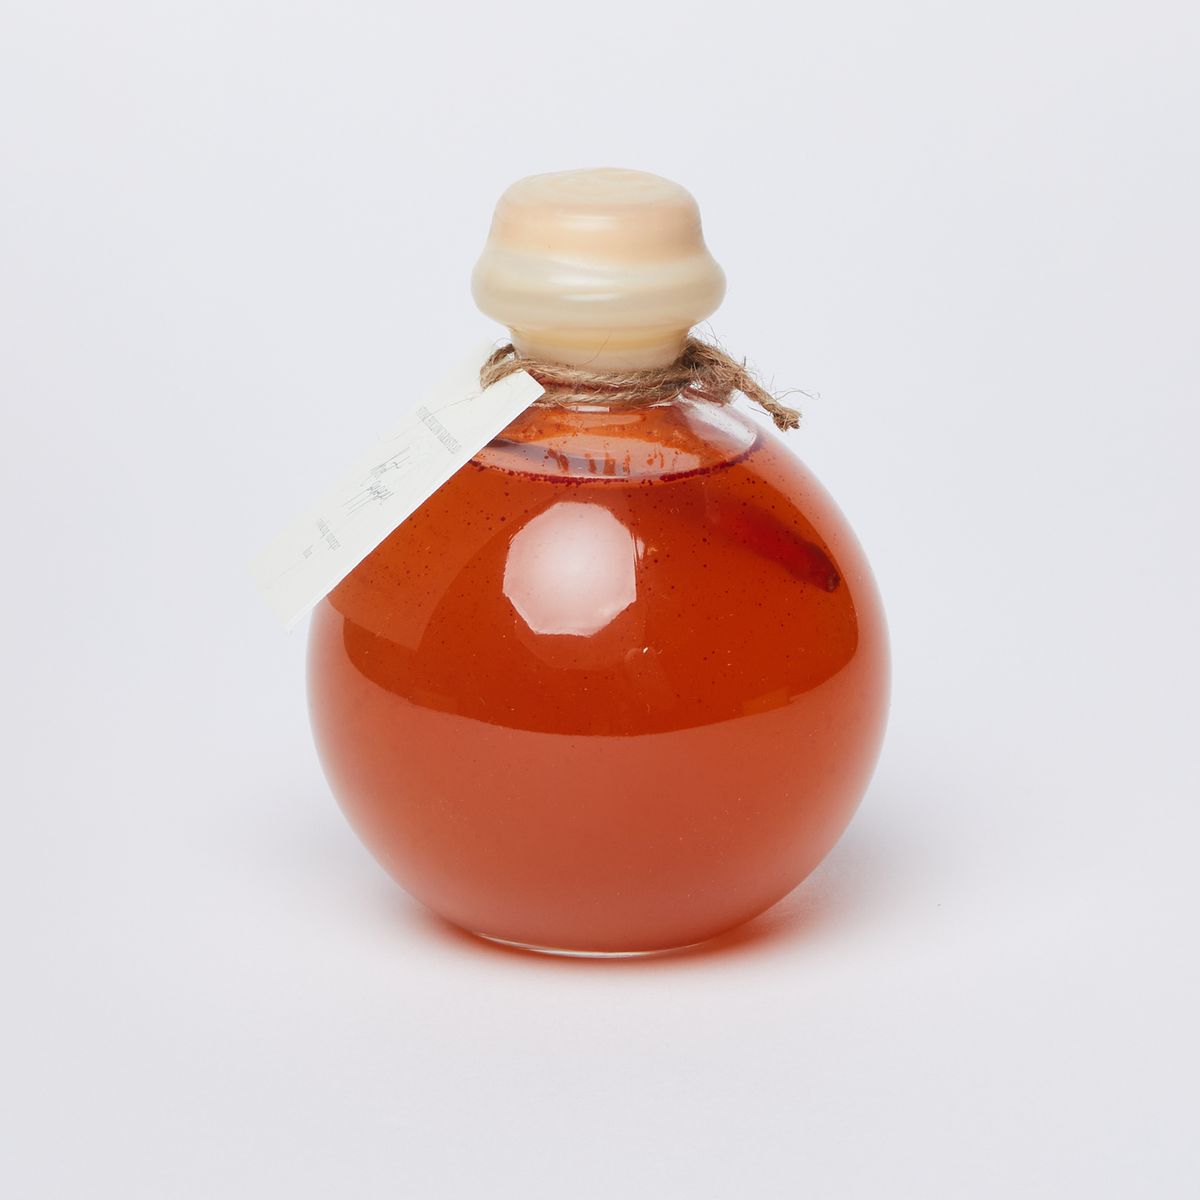 A clear spherical bottle full of a red liquid with a cork covered in wax and a white label tied with string around the neck